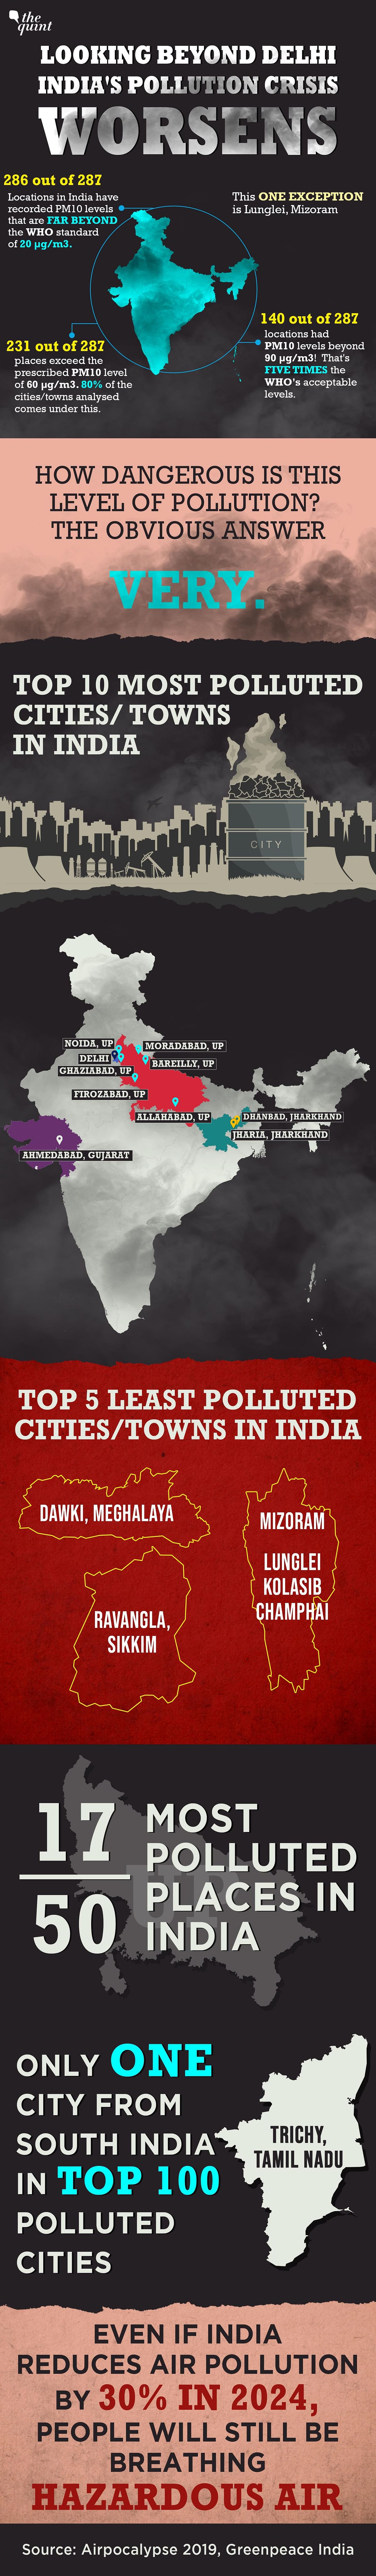 Uttar Pradesh emerged as the most polluted state in India, with 17 of the 50 most-polluted places located there.